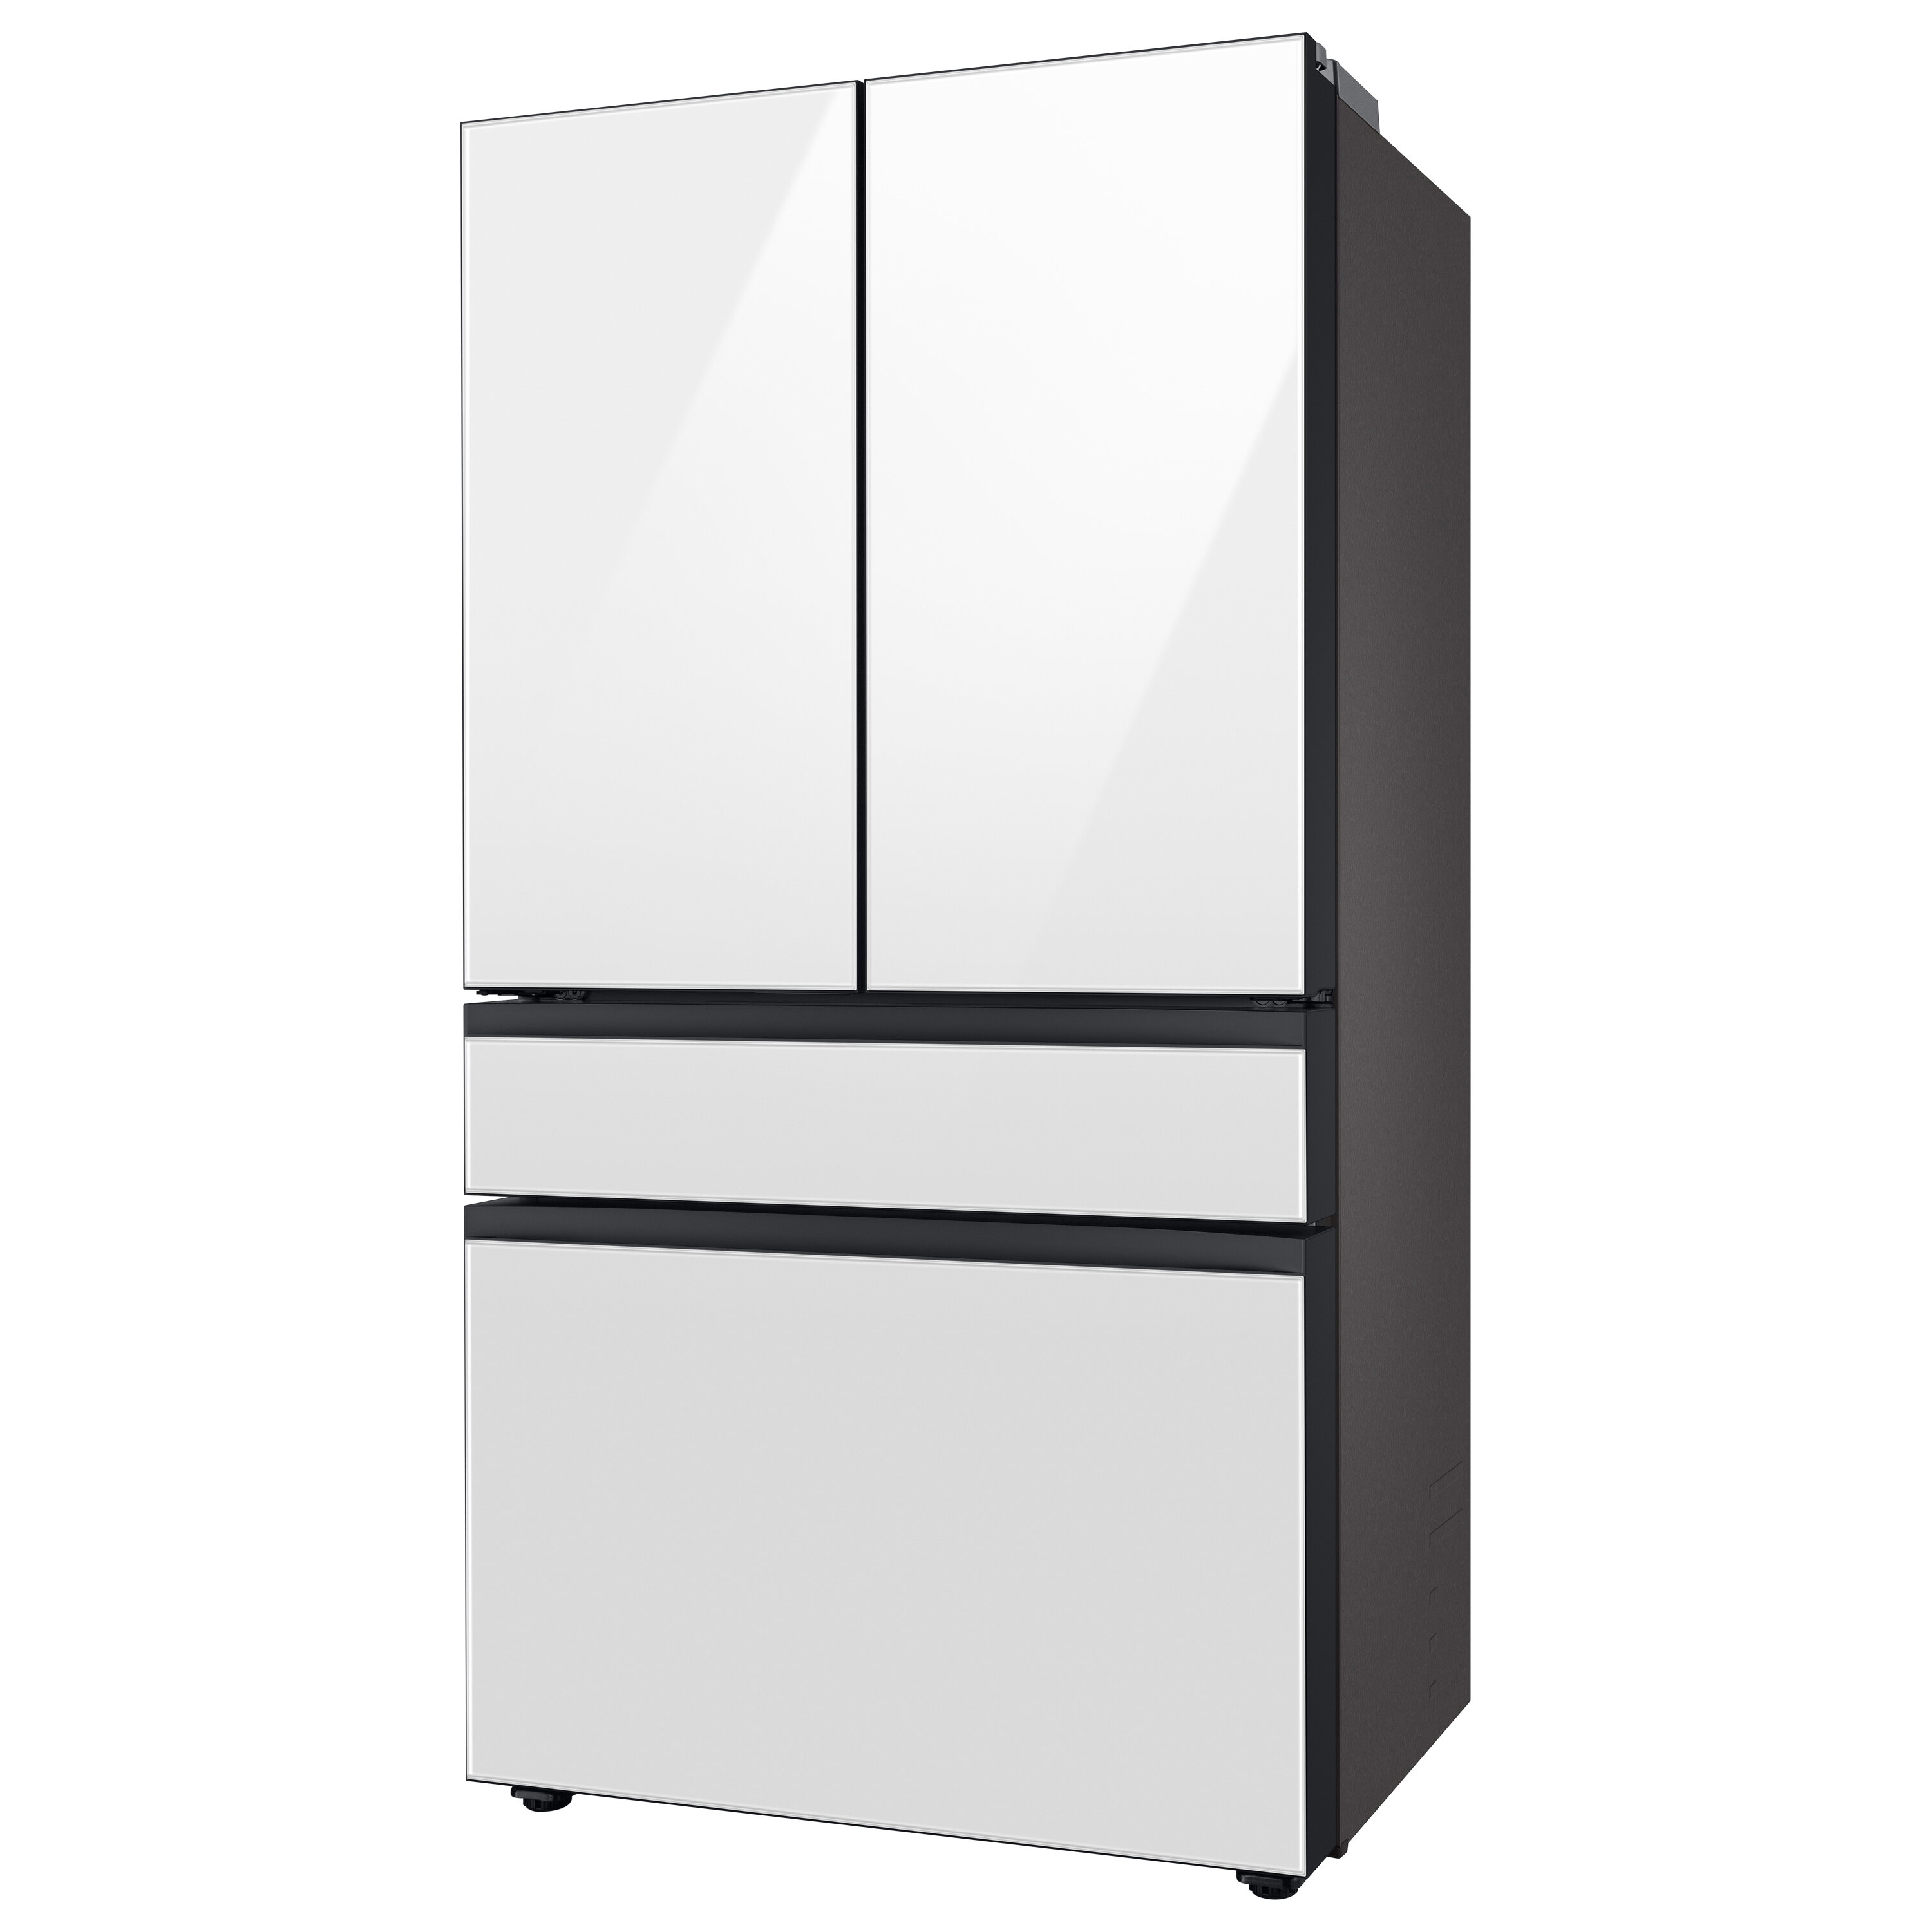 Samsung Bespoke 23 Cu. Ft. Counter Depth 4-Door French Door Refrigerator  with Auto Fill Water Pitcher - Stainless Steel Panels Included